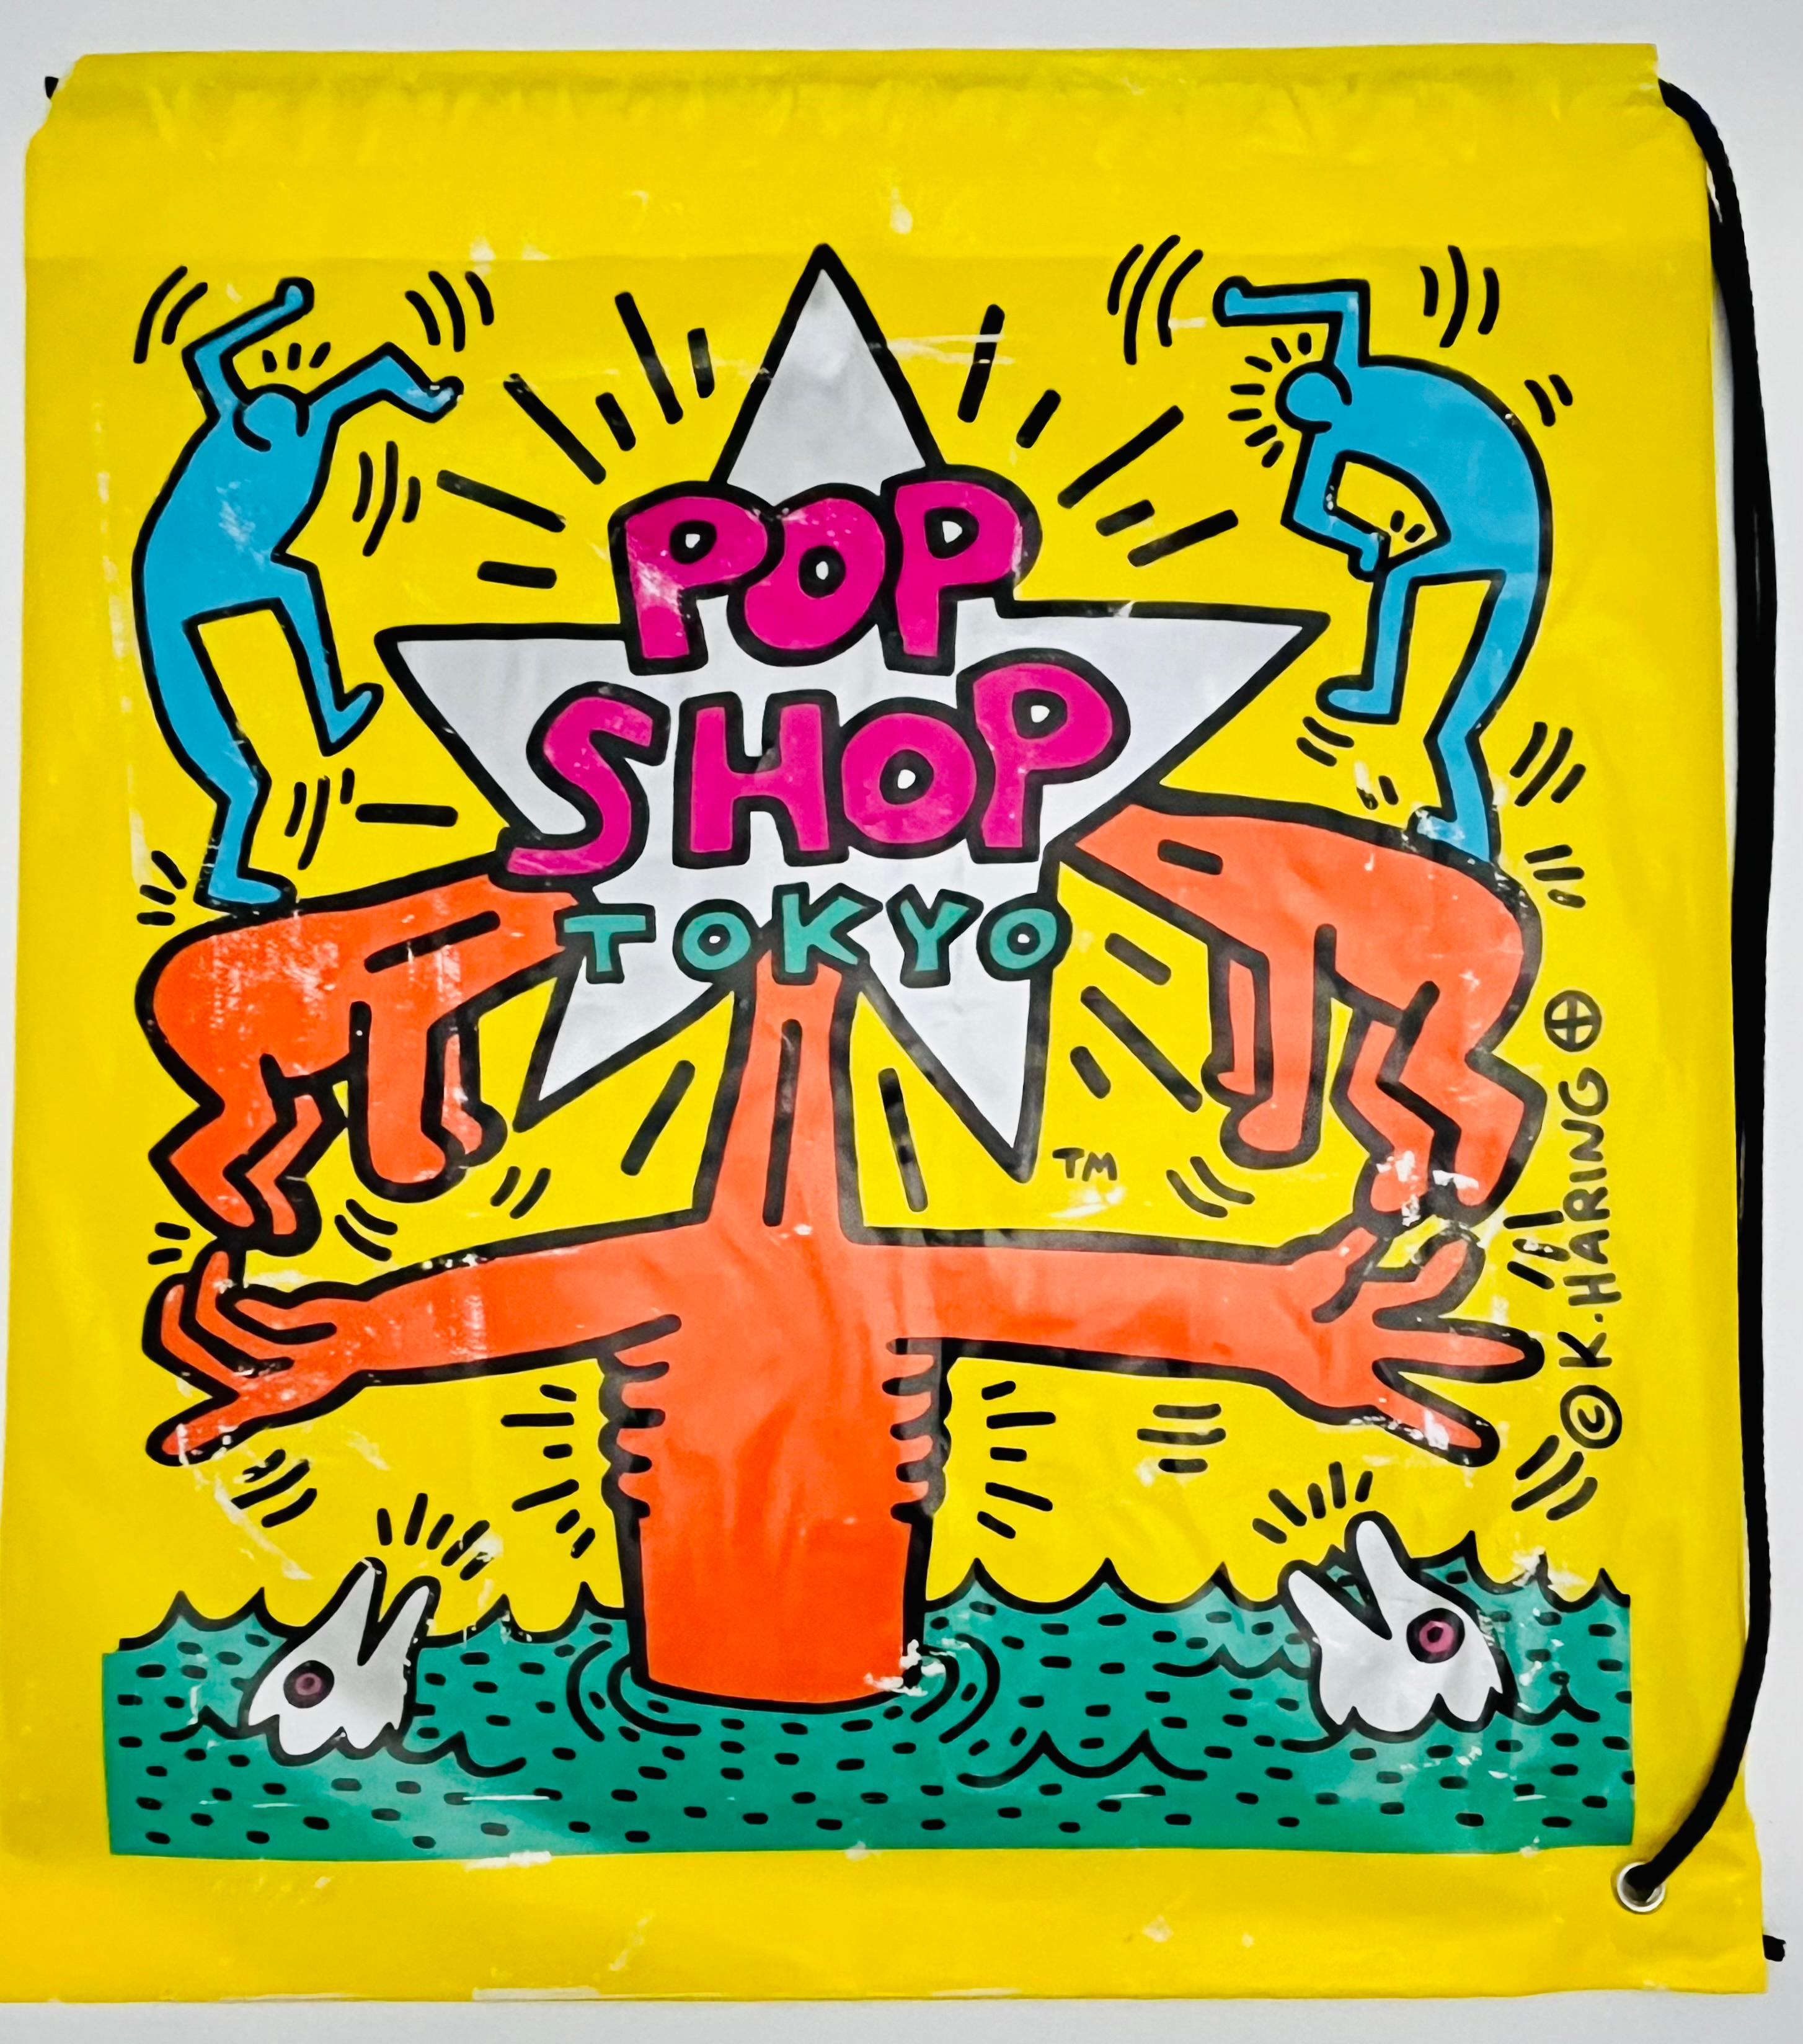 Keith Haring Pop Shop Tokyo 1988:
Rare vintage original 1980s Keith Haring Pop Shop Tokyo bag designed & illustrated by the artist. Features a bold Keith Haring printed signature and standout original Haring Pop shop Tokyo logos, plus bright, lush